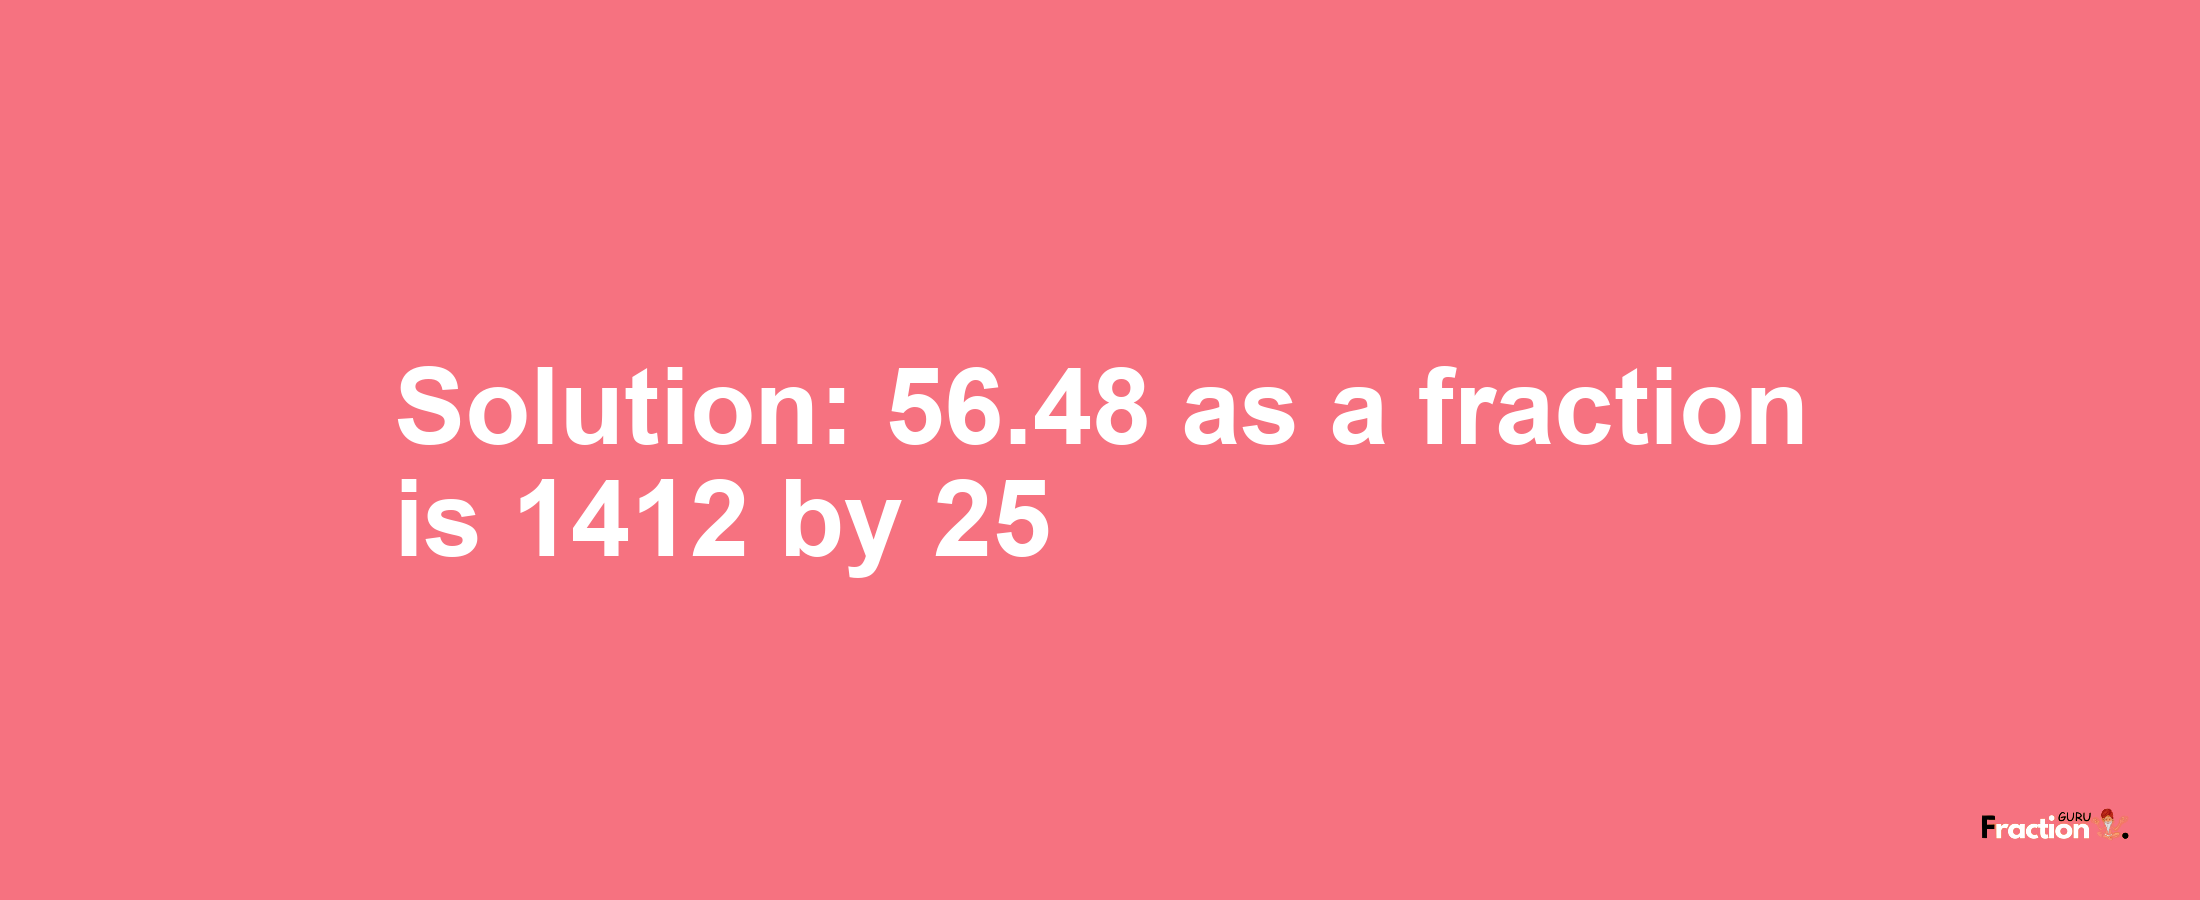 Solution:56.48 as a fraction is 1412/25